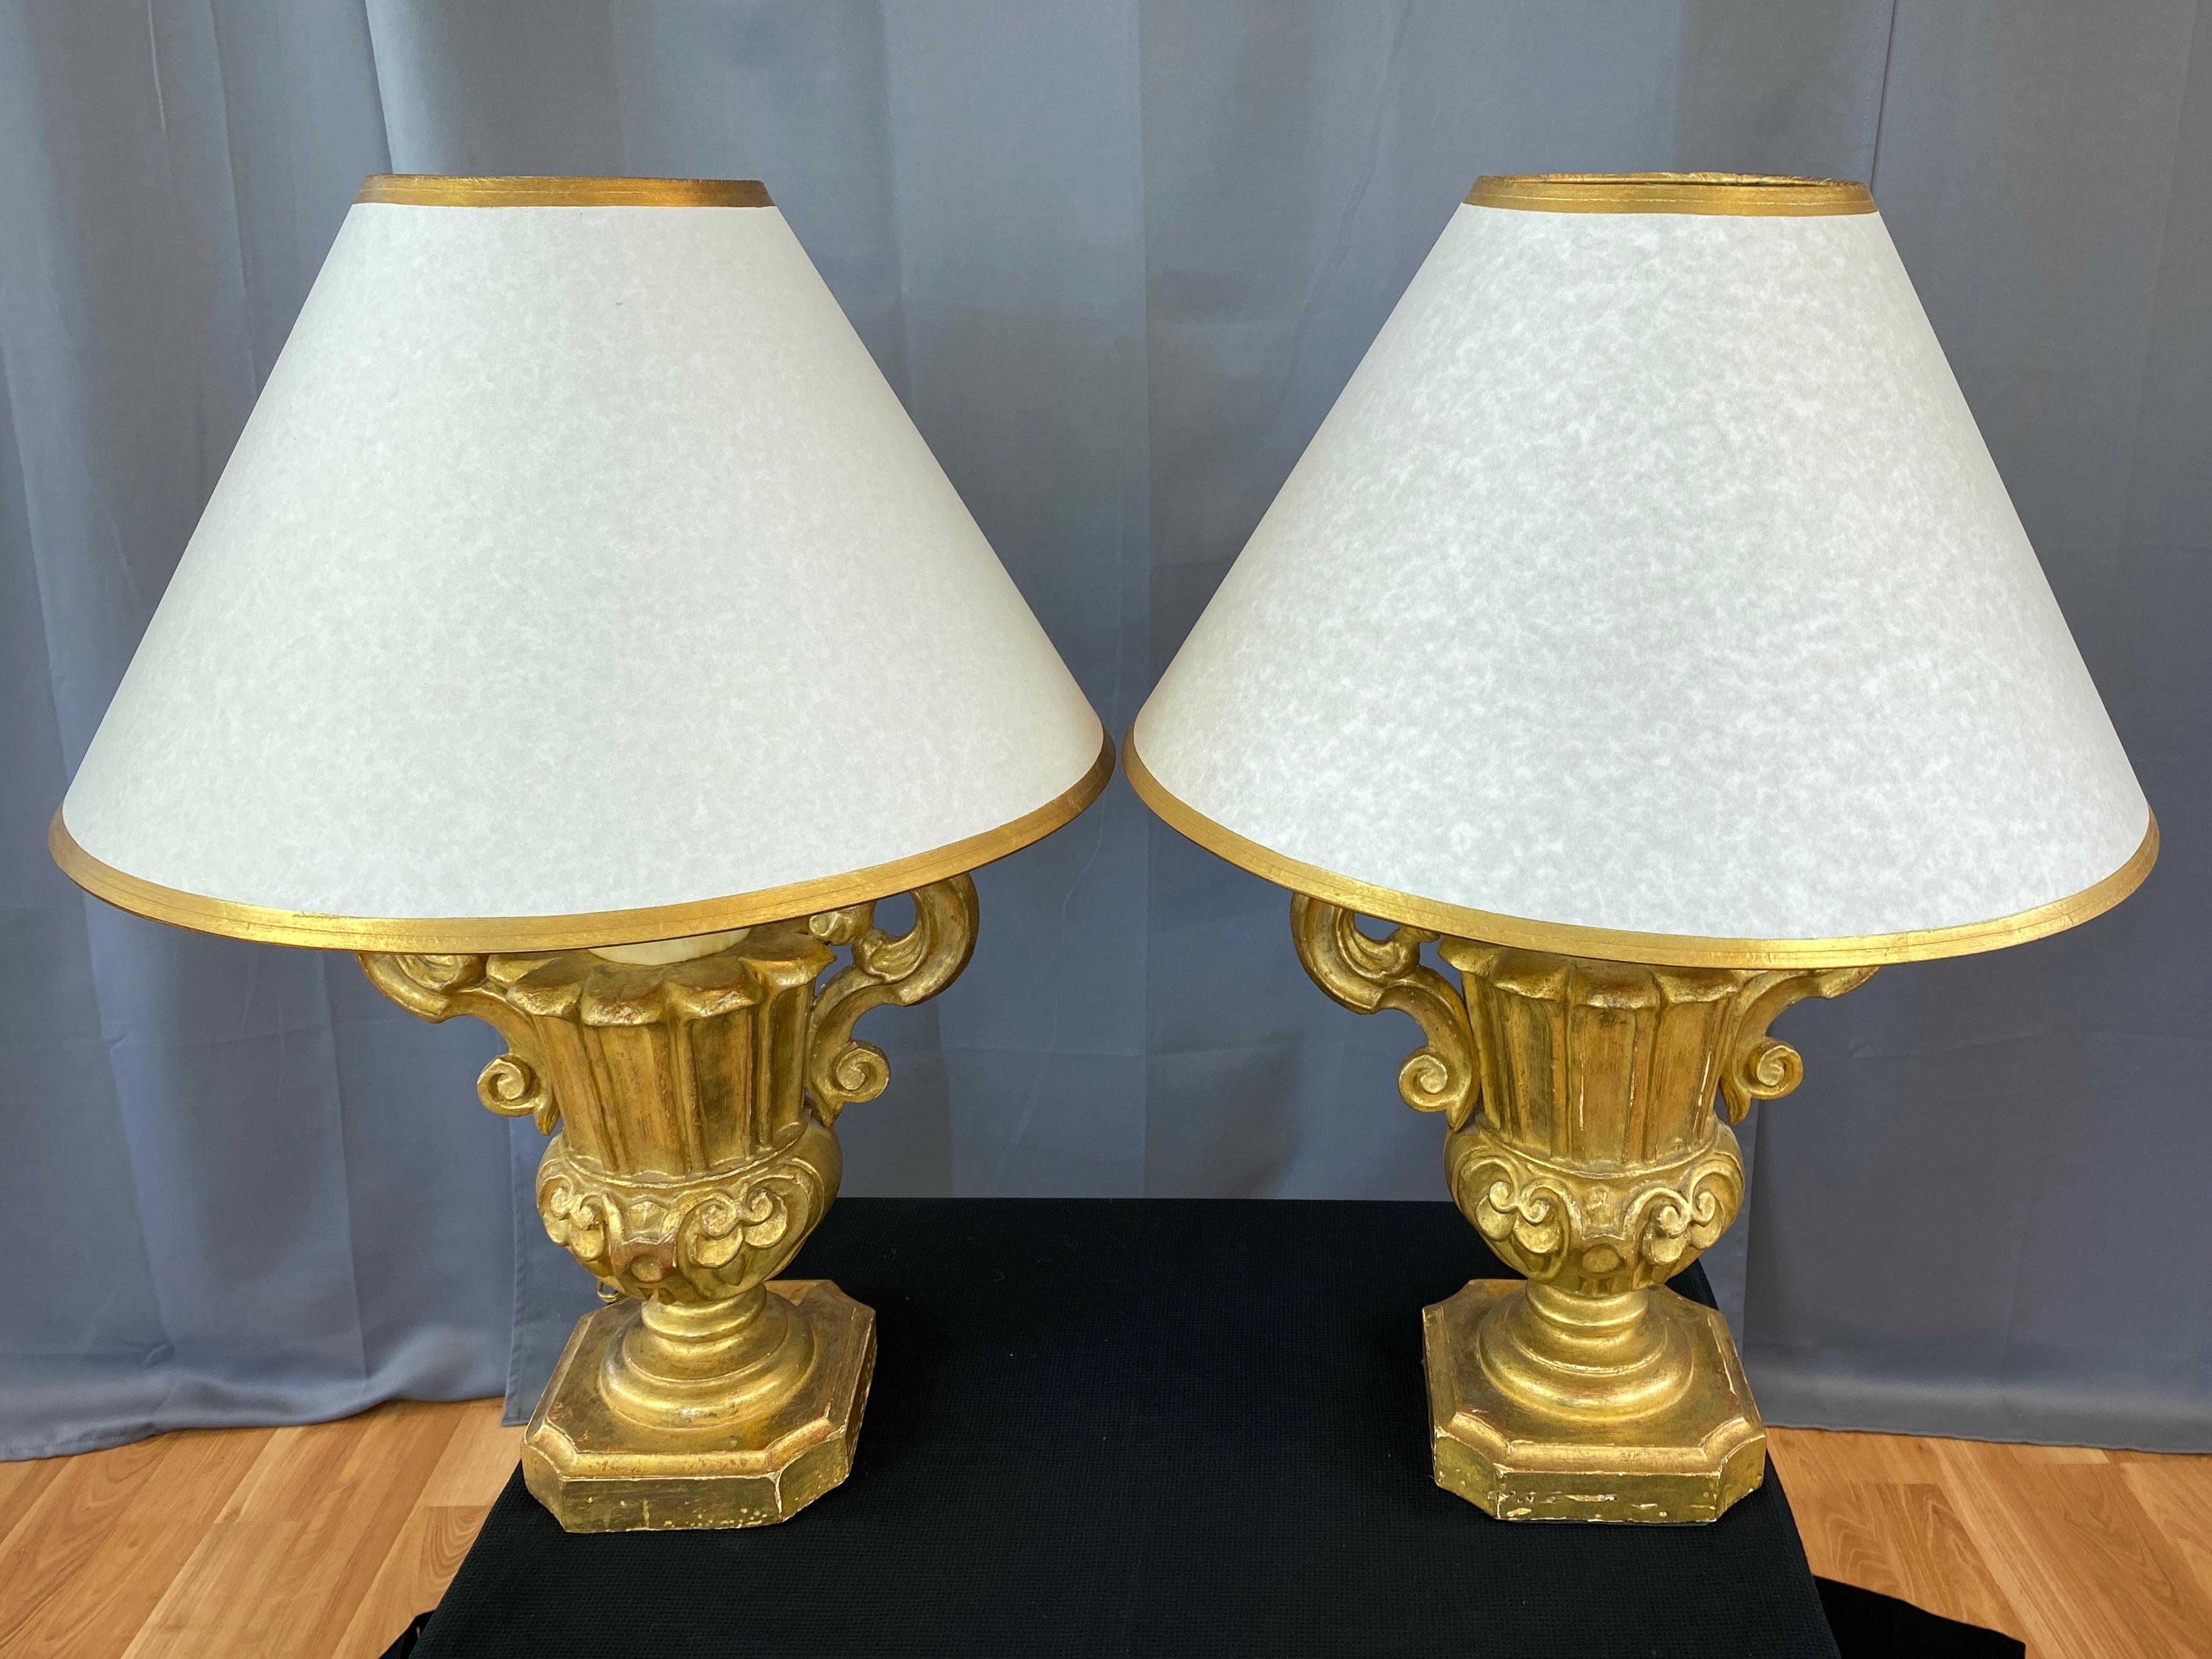 Pair of Italian Baroque Revival Giltwood Urn and Faux Candle Table Lamps, 1930s For Sale 4